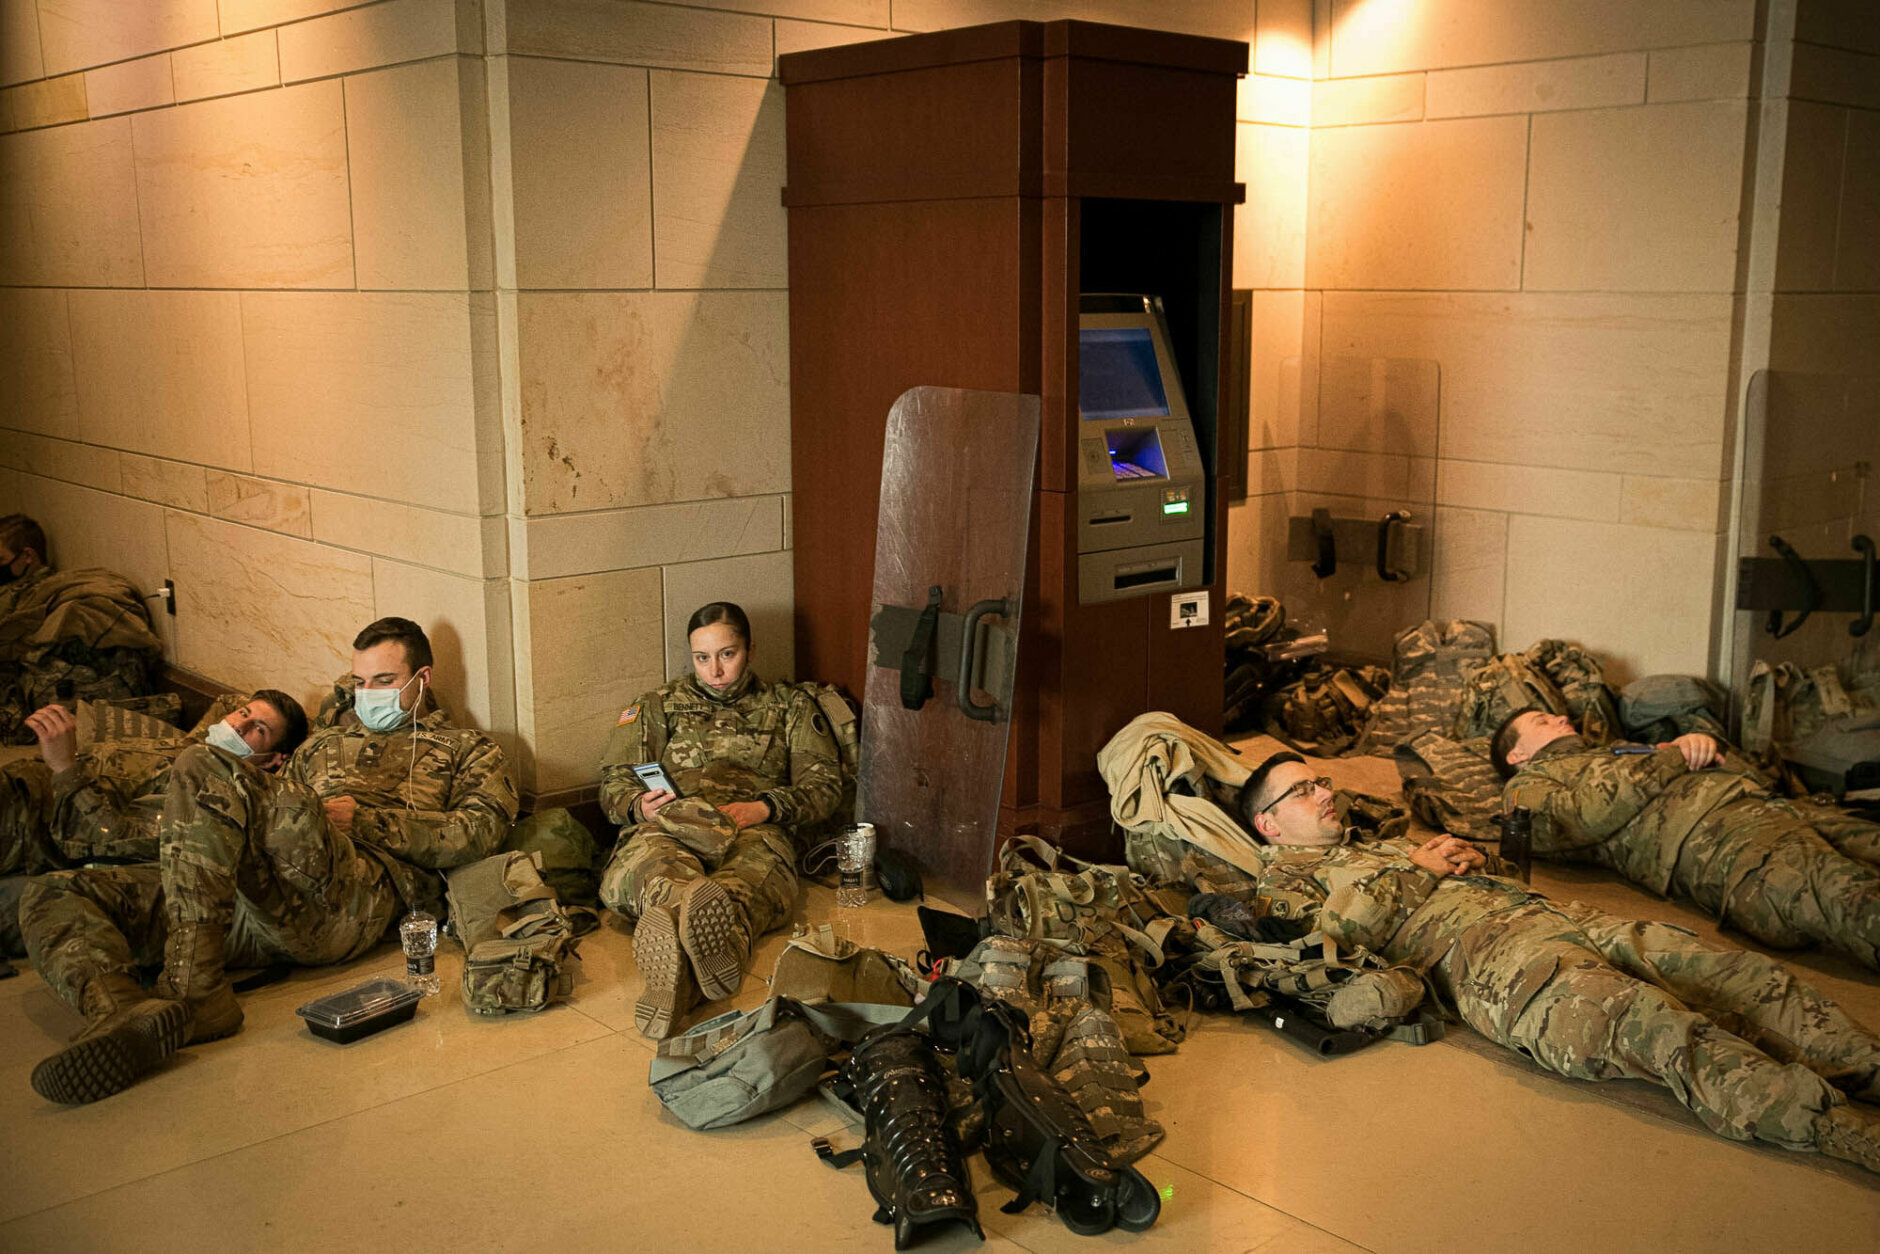 Members of the National Guard rest beside an ATM in the Capitol visitor center on Jan. 13, 2021. More than 20,000 armed guardsmen are expected to provide security in the nation's capital amid threats against the inauguration of President-elect Joe Biden. (WTOP/Alejandro Alvarez)